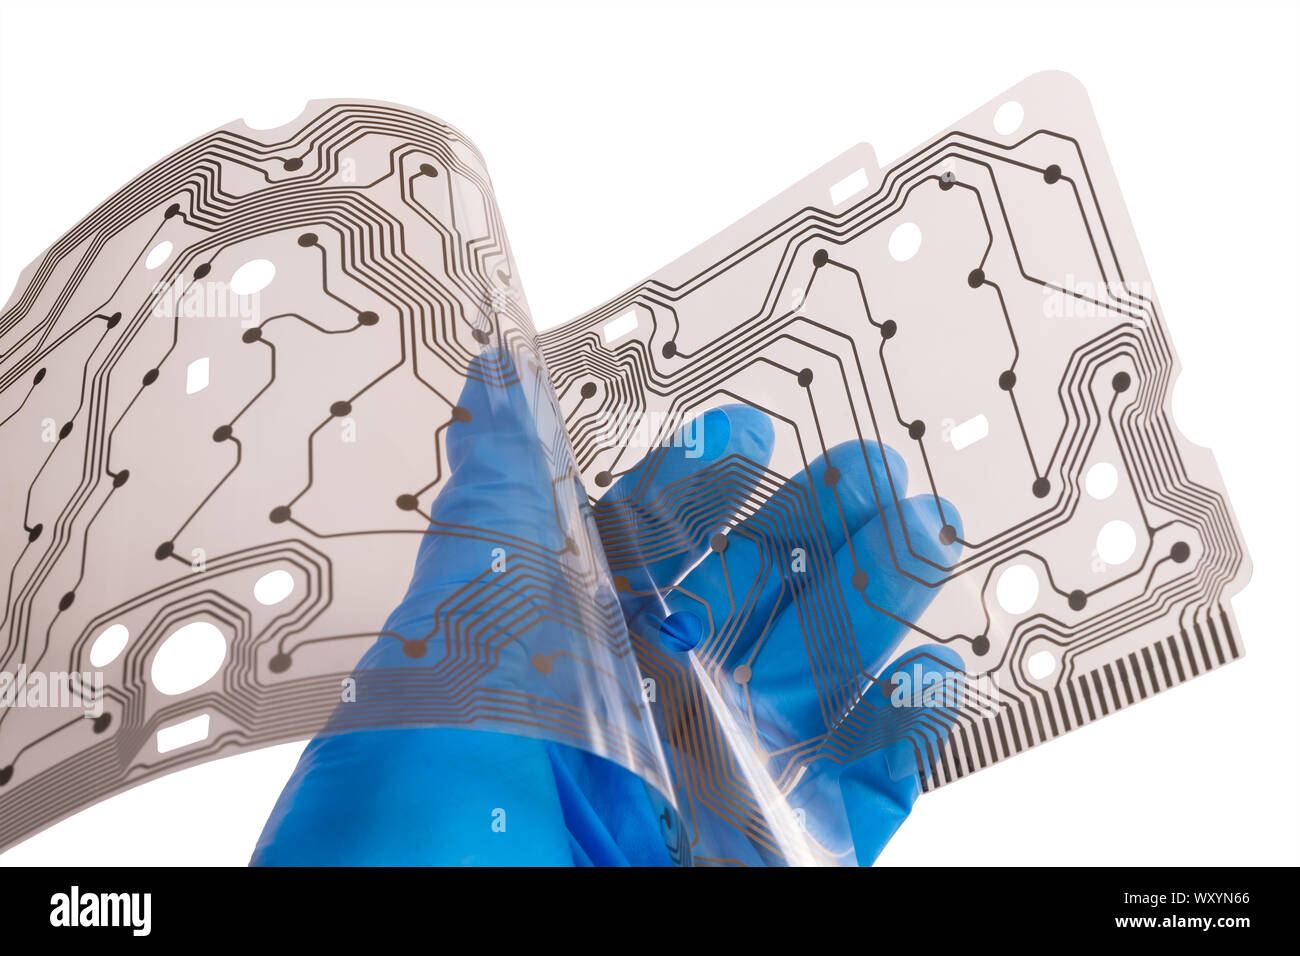 Plastic flex printed circuit board. Human hand in blue glove. Engineer holding a bent membrane of dismantled computer keyboard. Brown copper PCB layer. Stock Photo